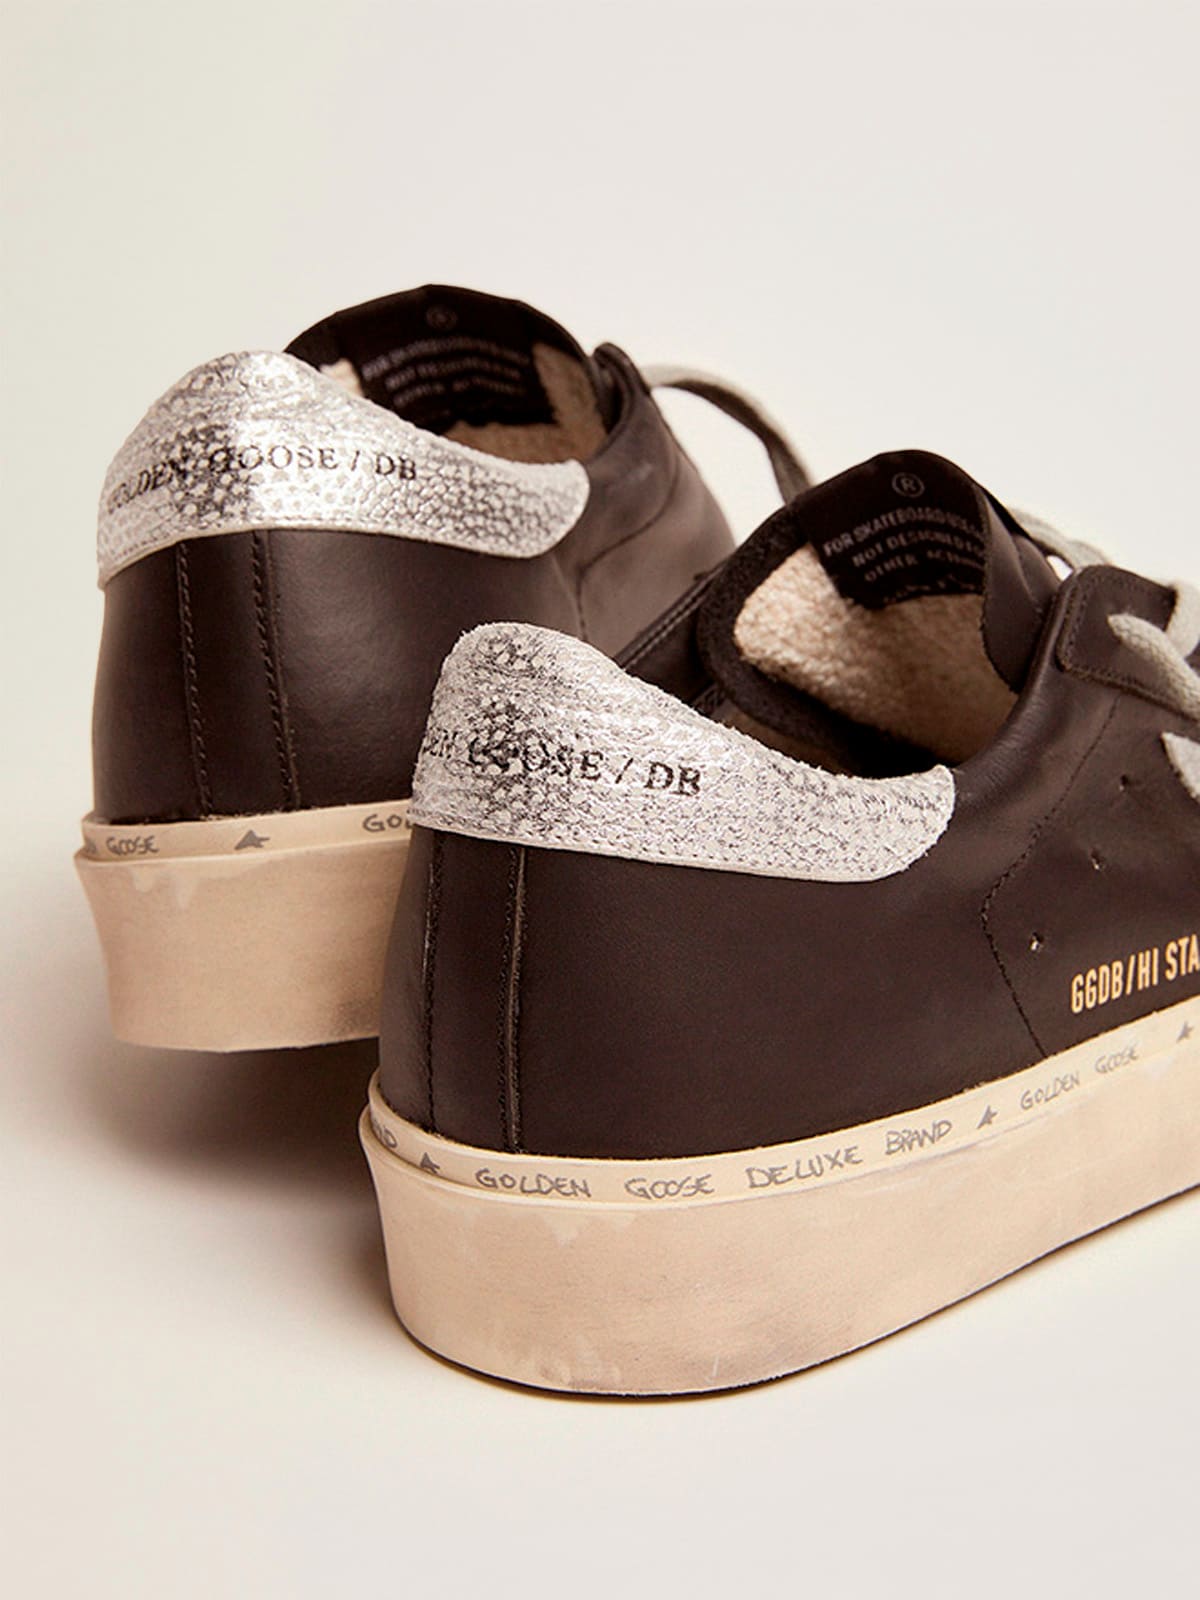 Golden Goose - Hi Star sneakers in black leather with silver laminated leather star in 